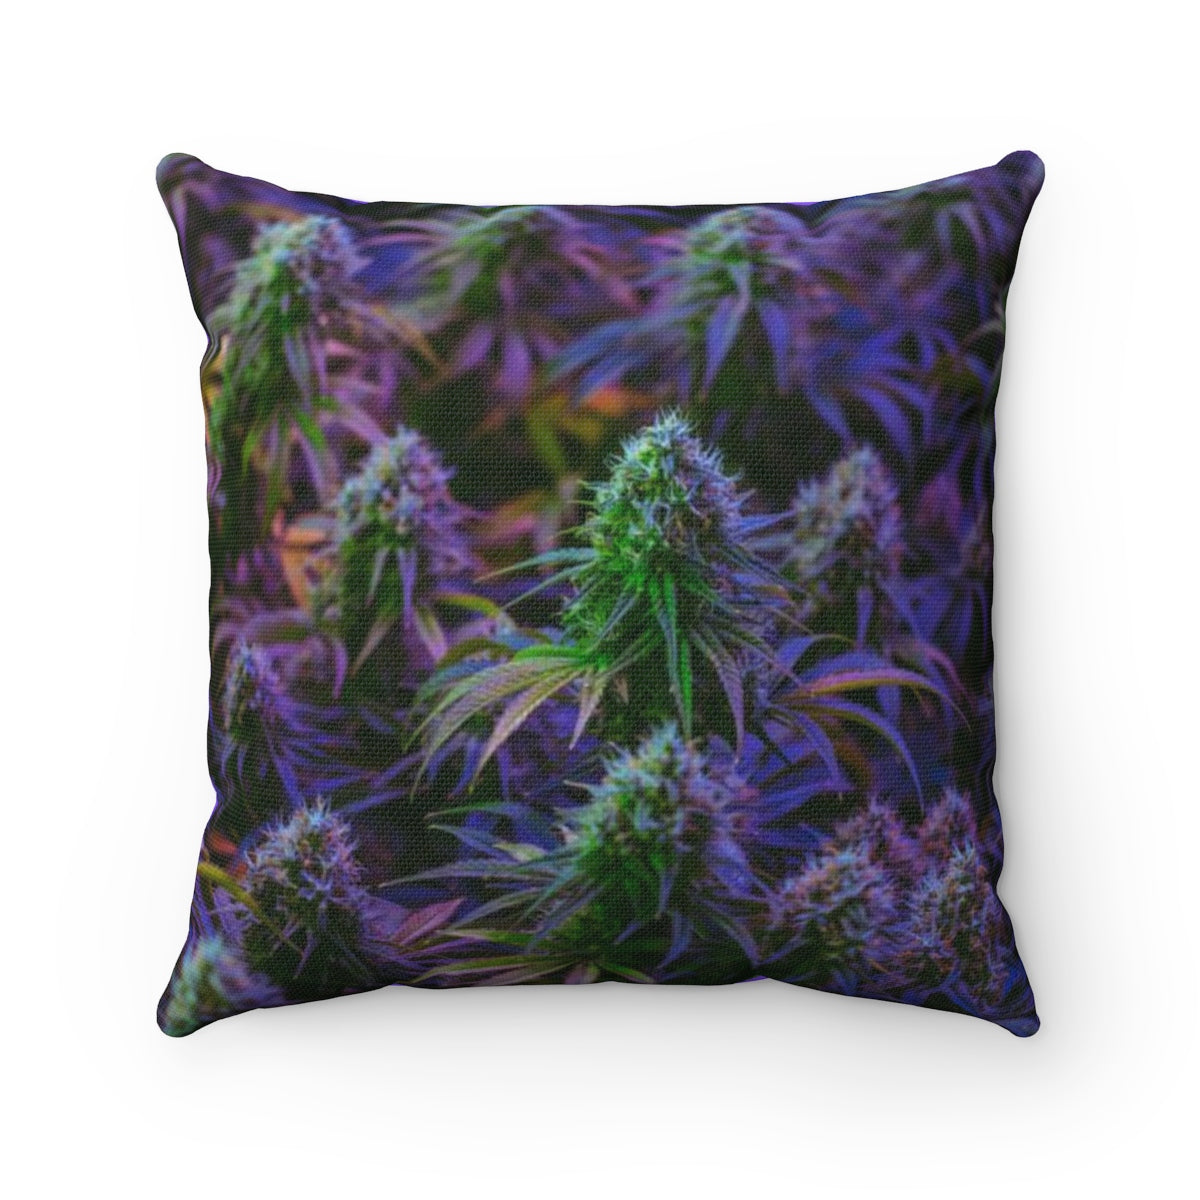 The Purple Cannabis Collection